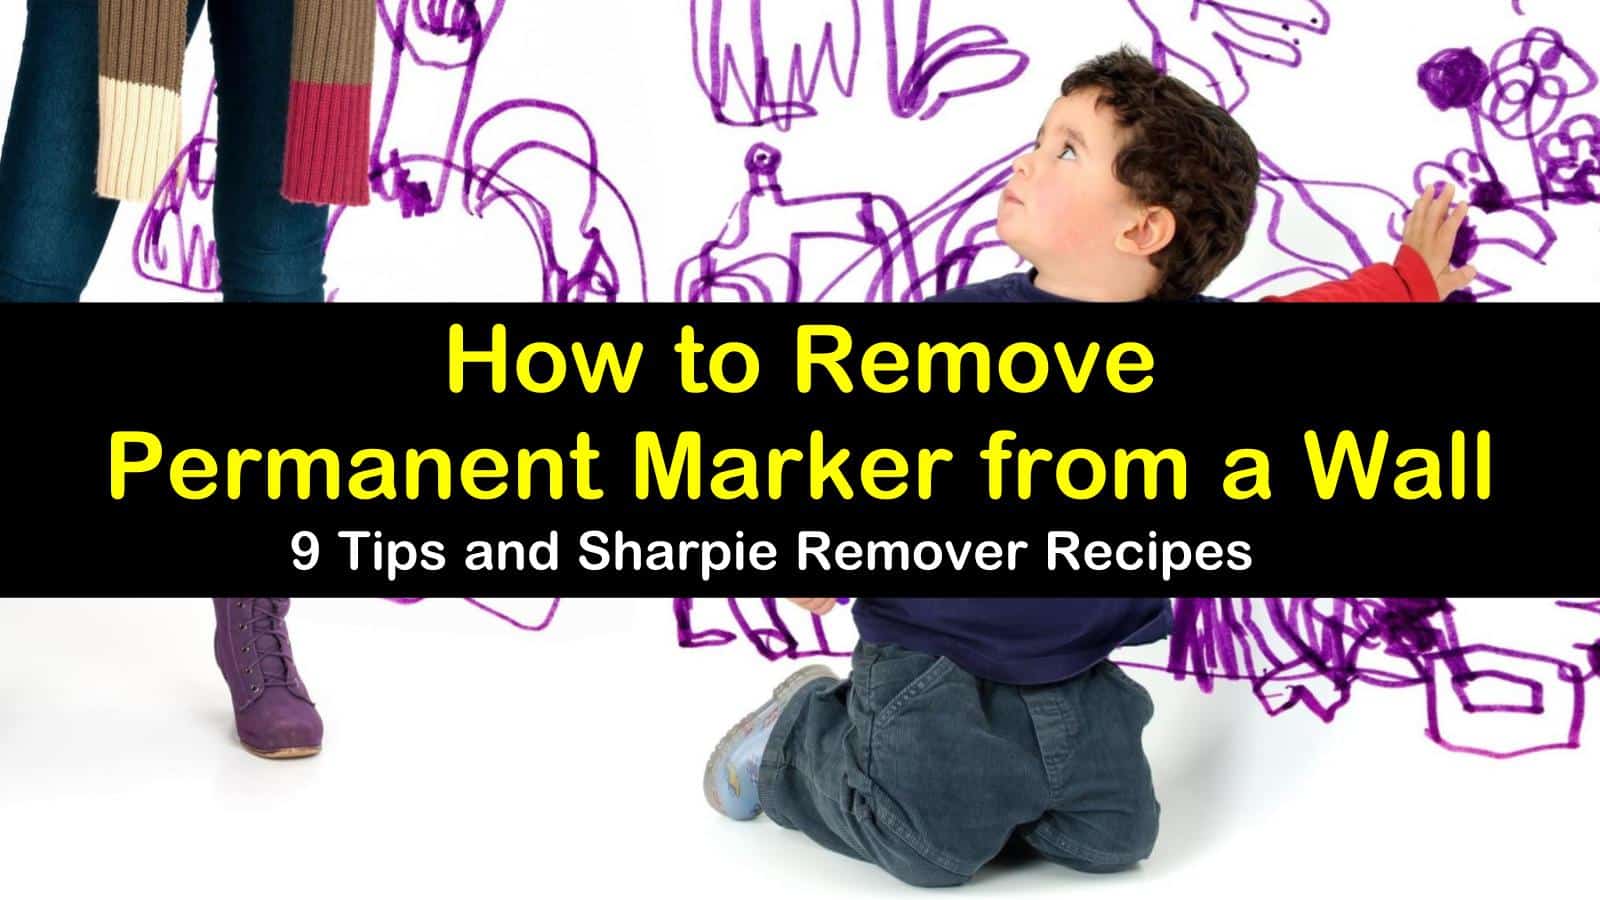 marker stain remover